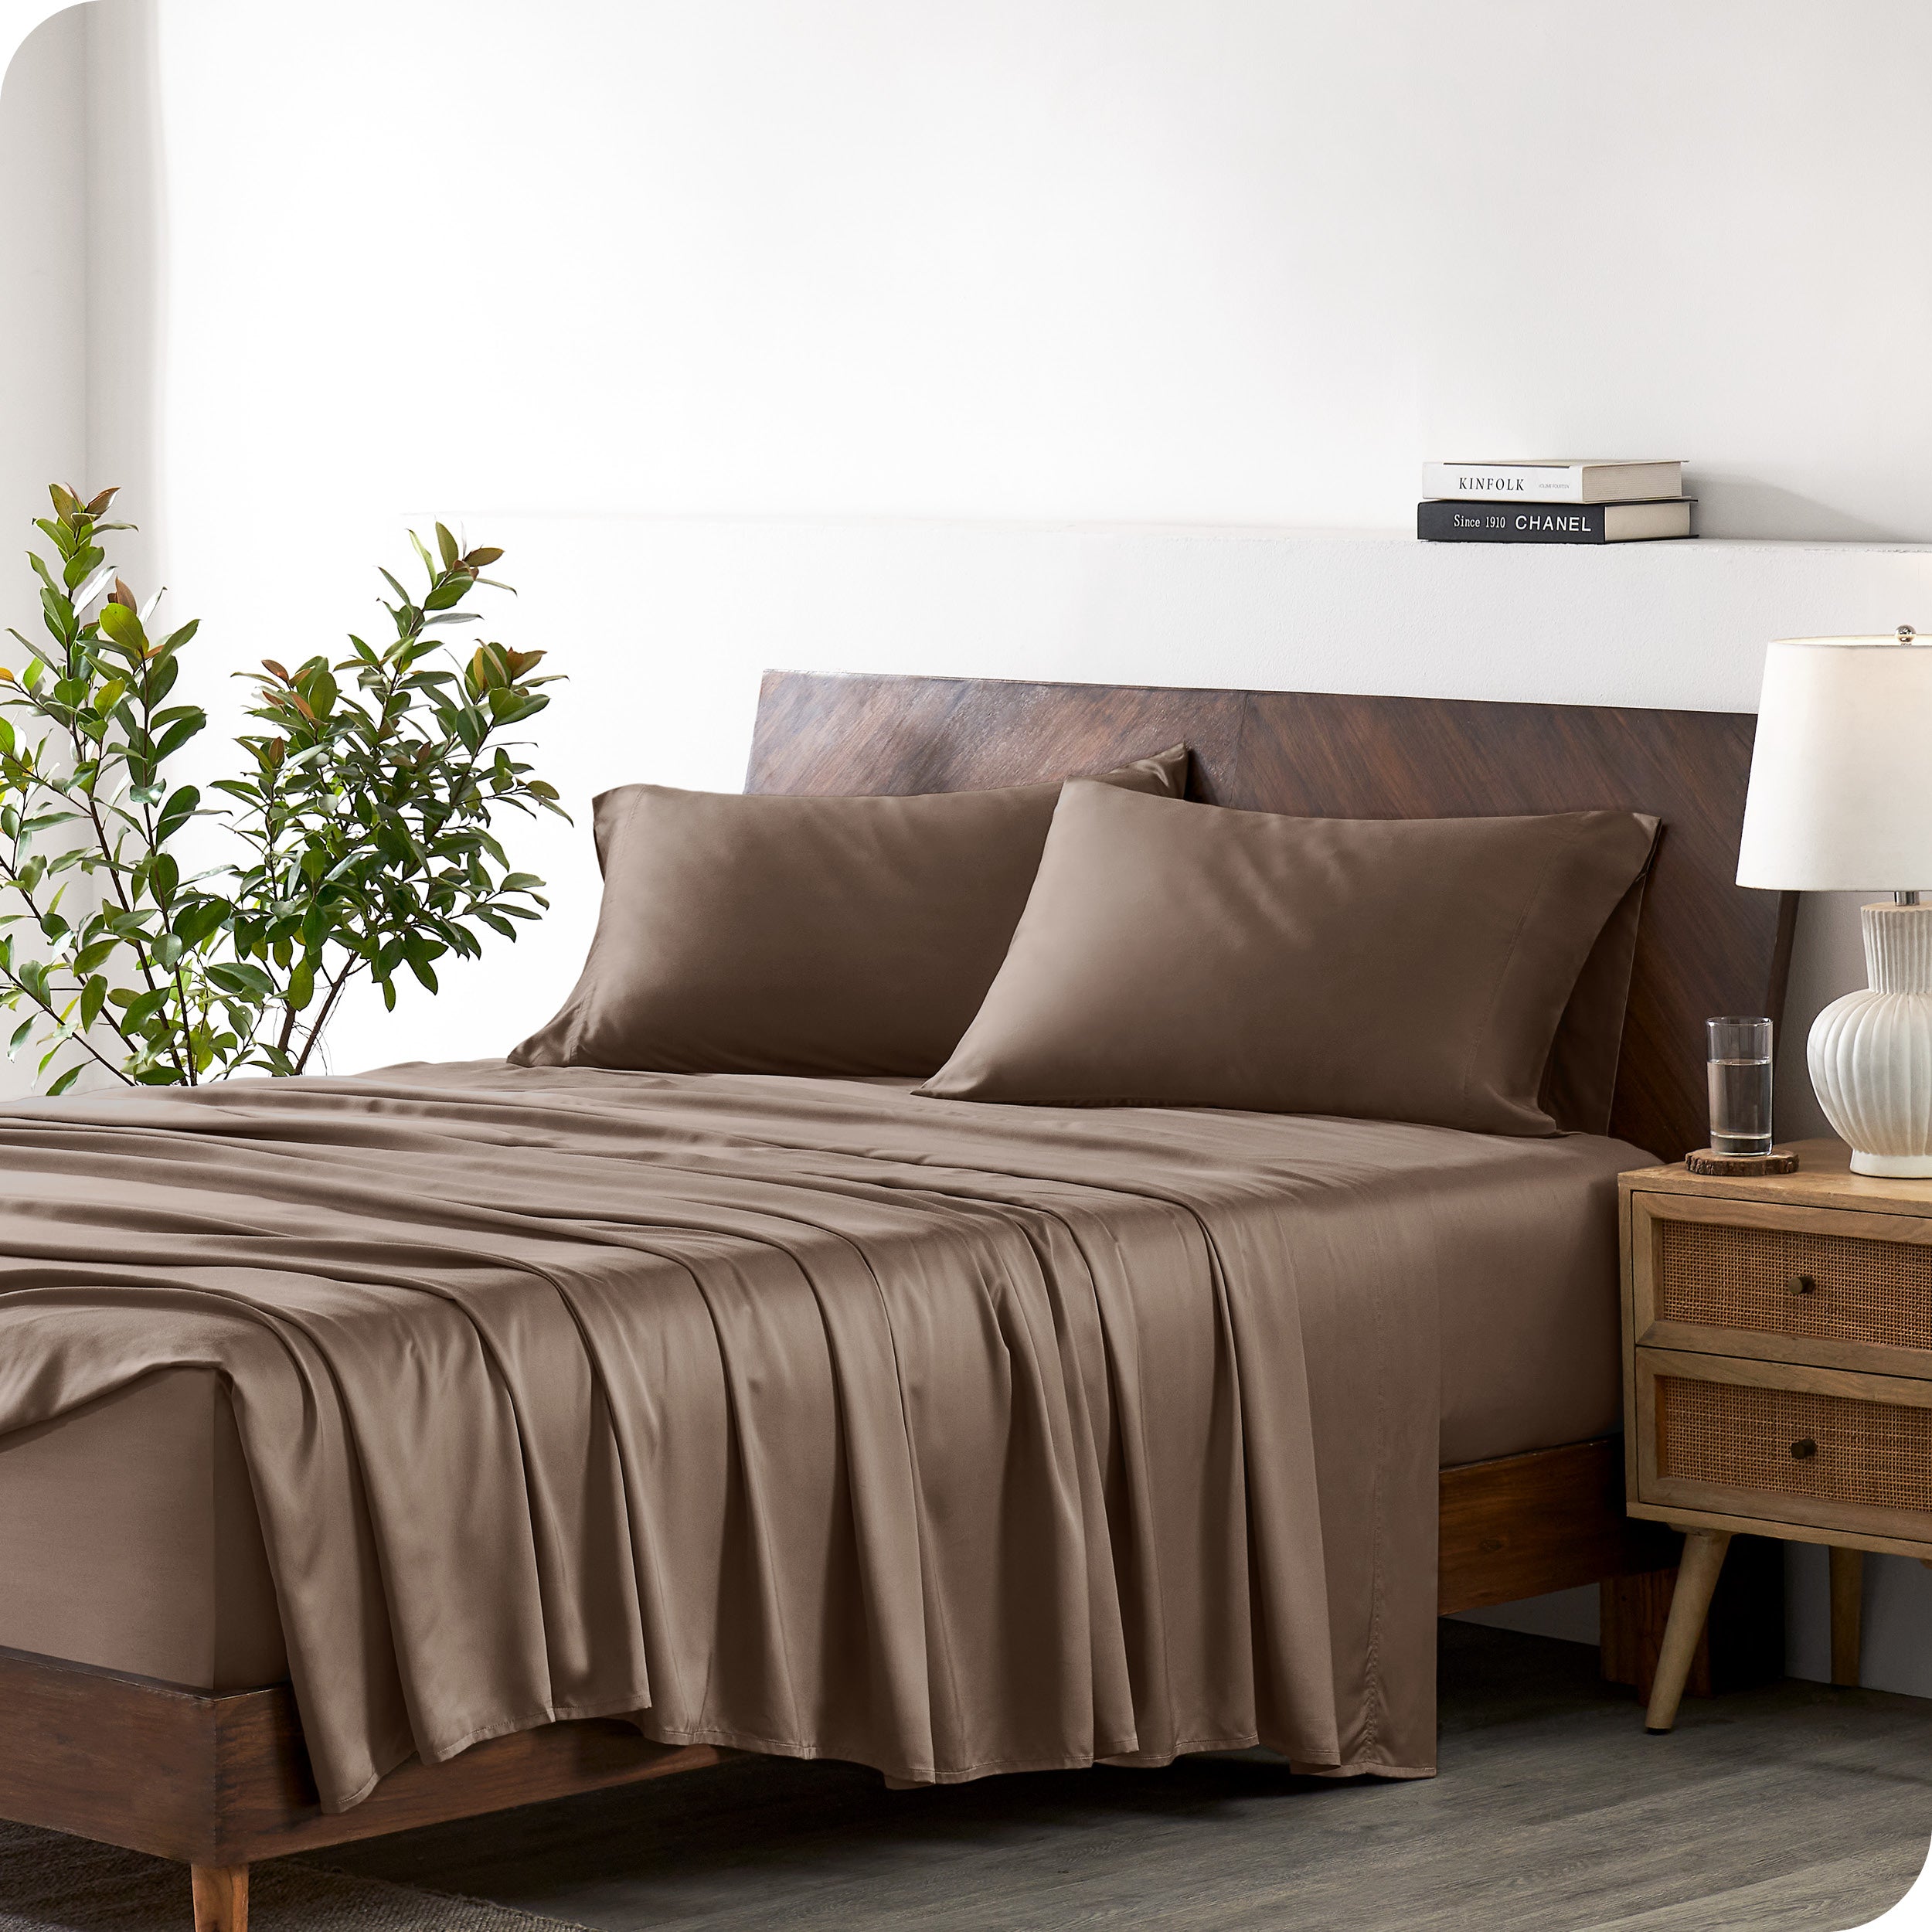 A bamboo sheet set draped over a bed with a wooden bed frame